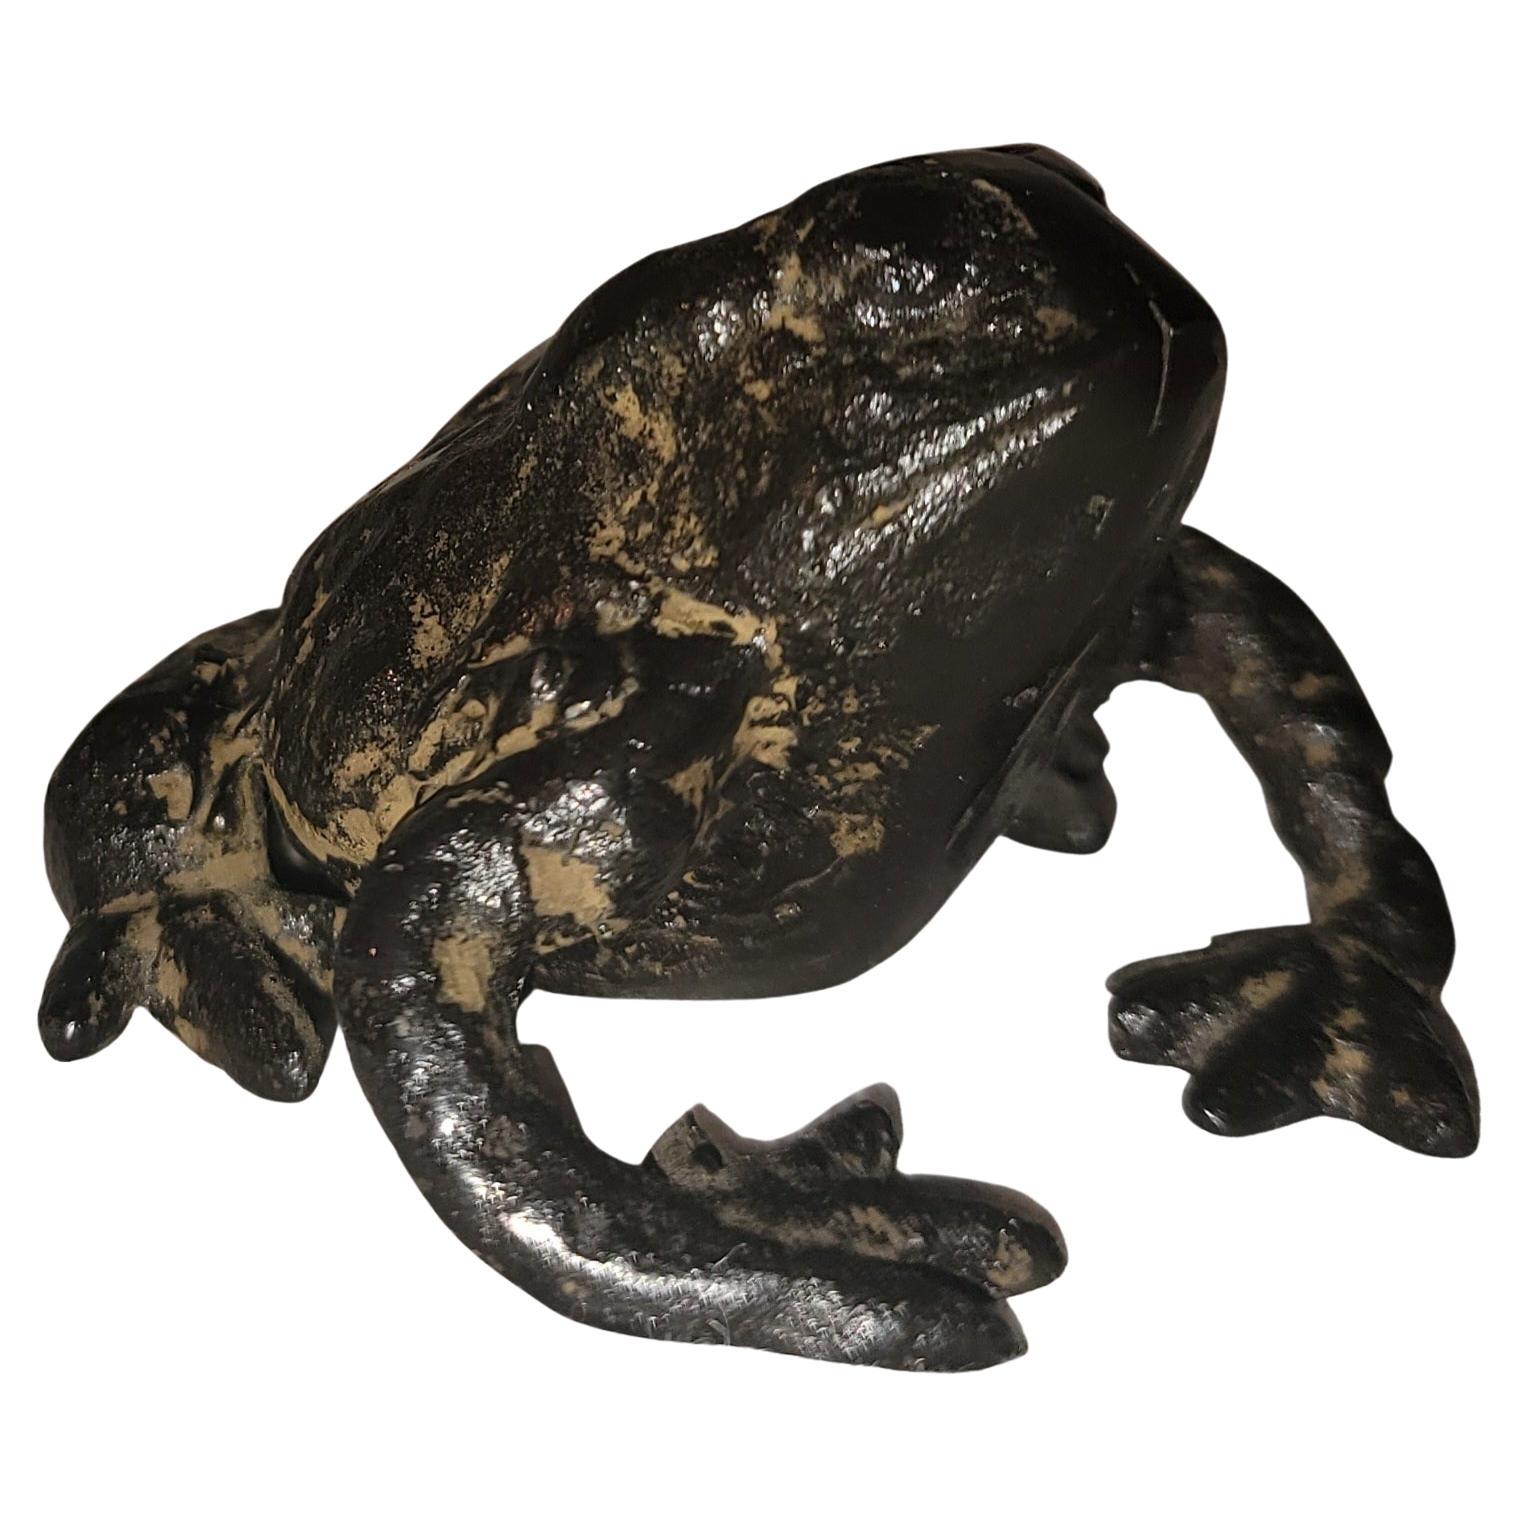 Frog Garden Ornament or Desk Weight For Sale